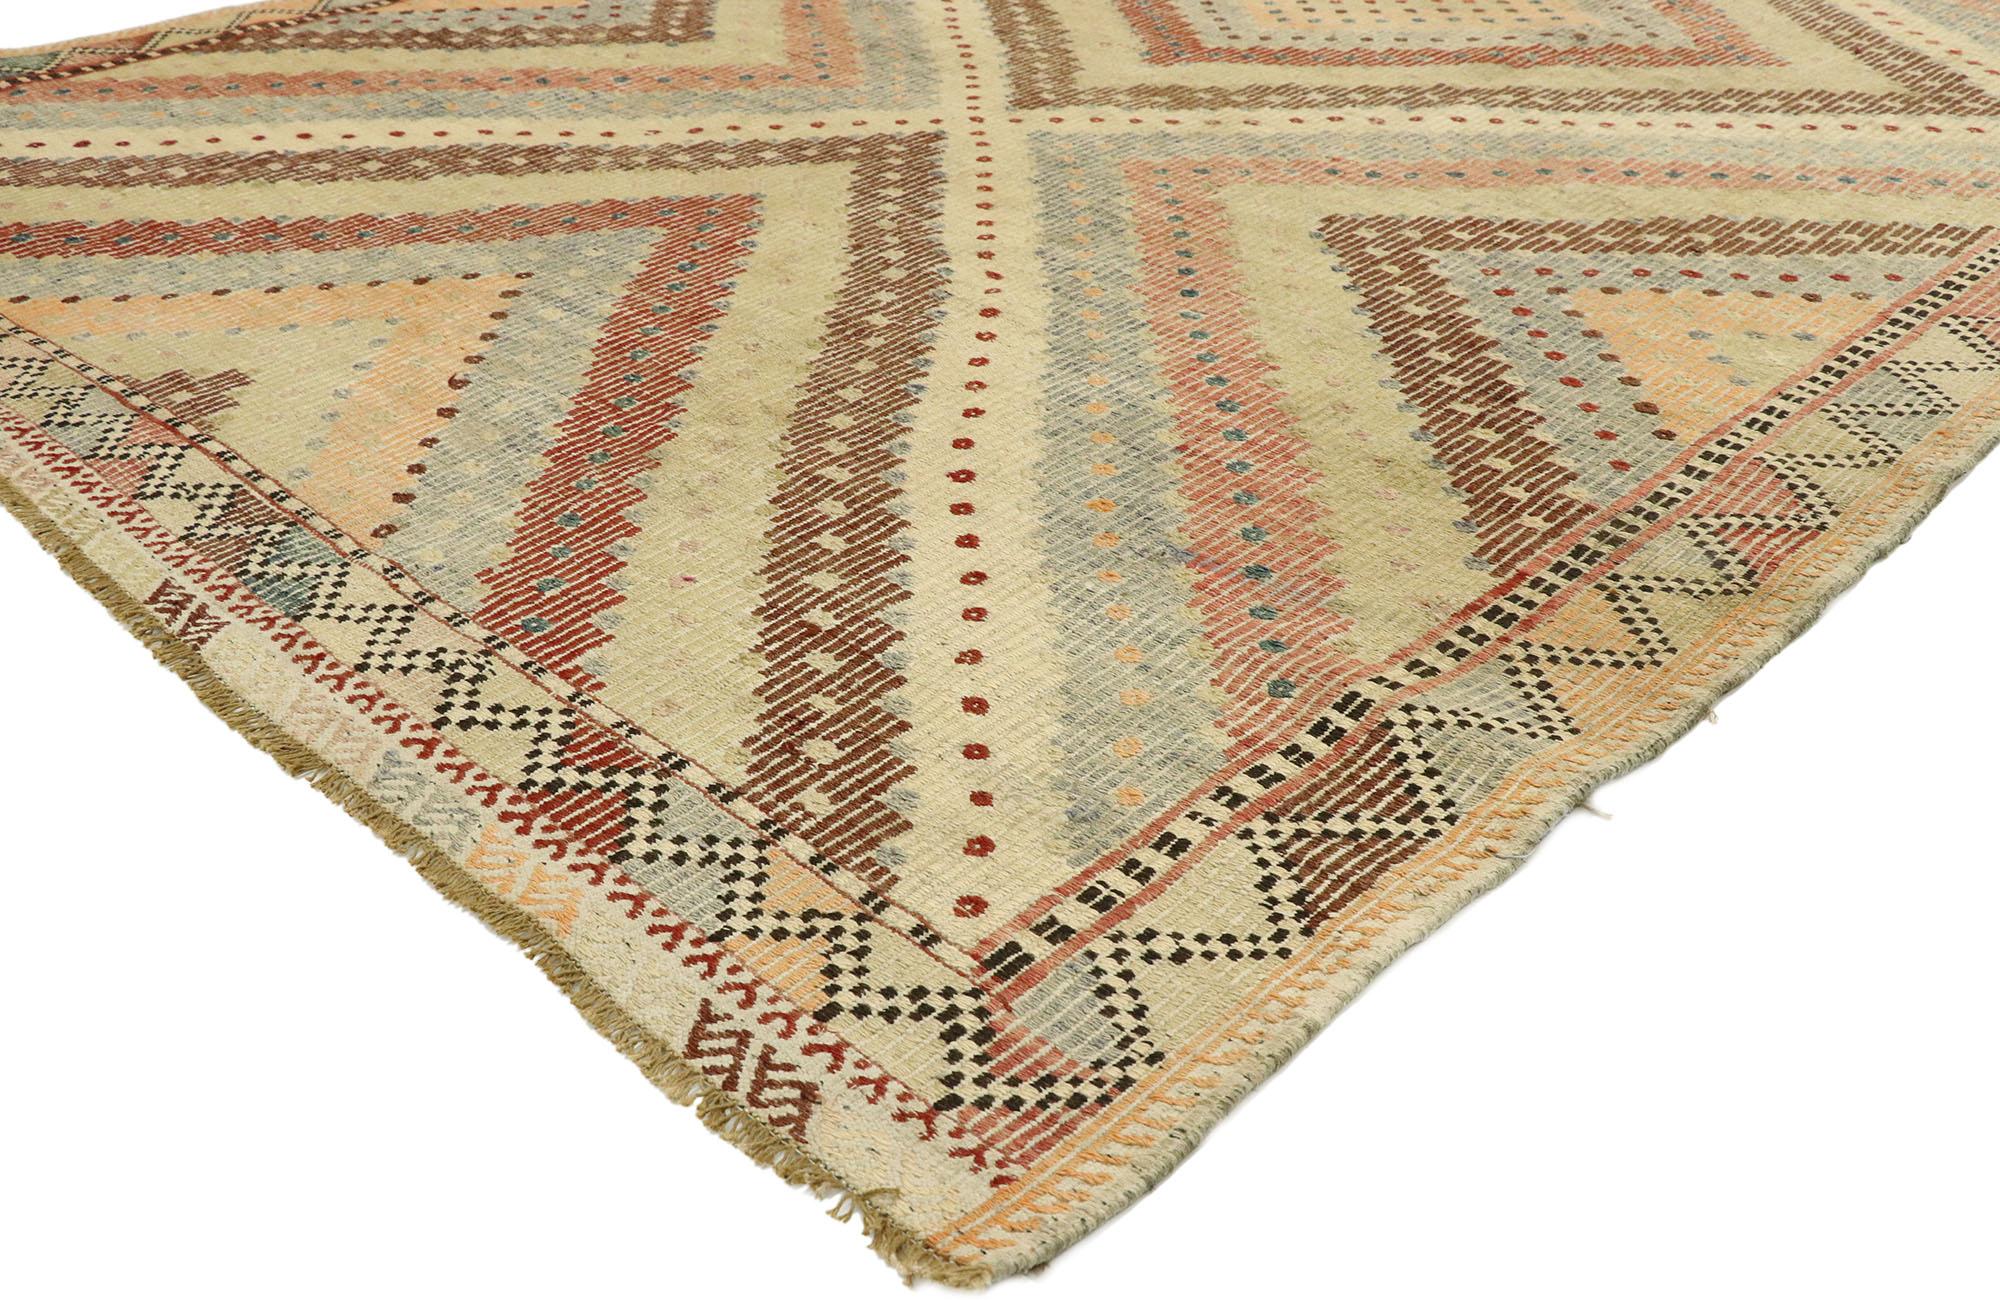 Hand-Woven Distressed Turkish Flat-Weave Kilim Rug with Modern Southwestern Boho Chic Style For Sale